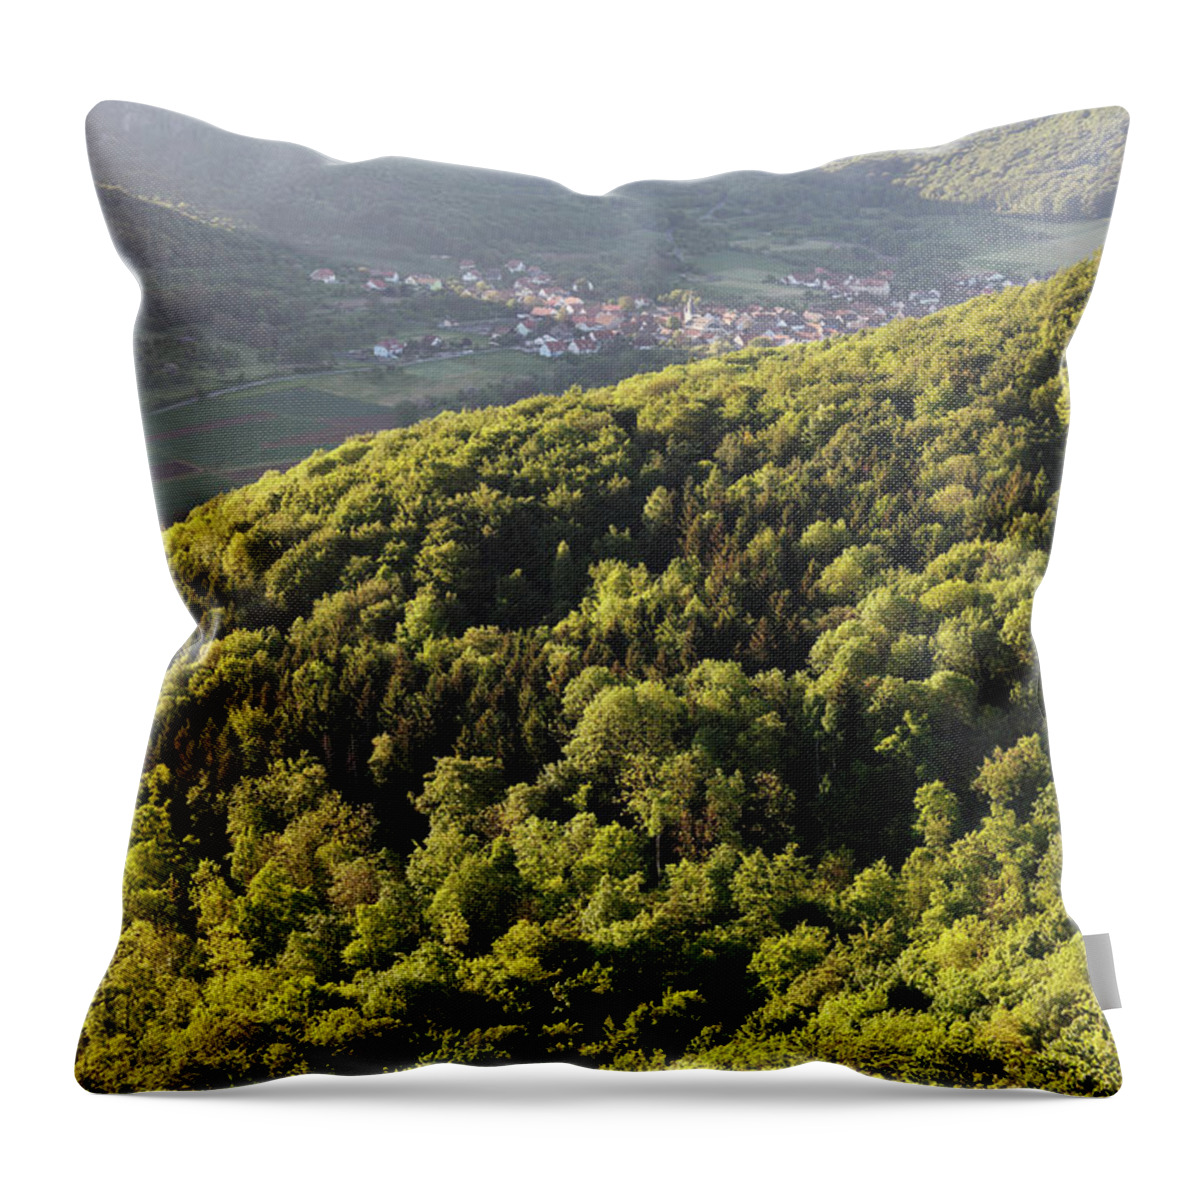 Scenics Throw Pillow featuring the photograph Germany, Bavaria, Franconia, Franconian by Westend61